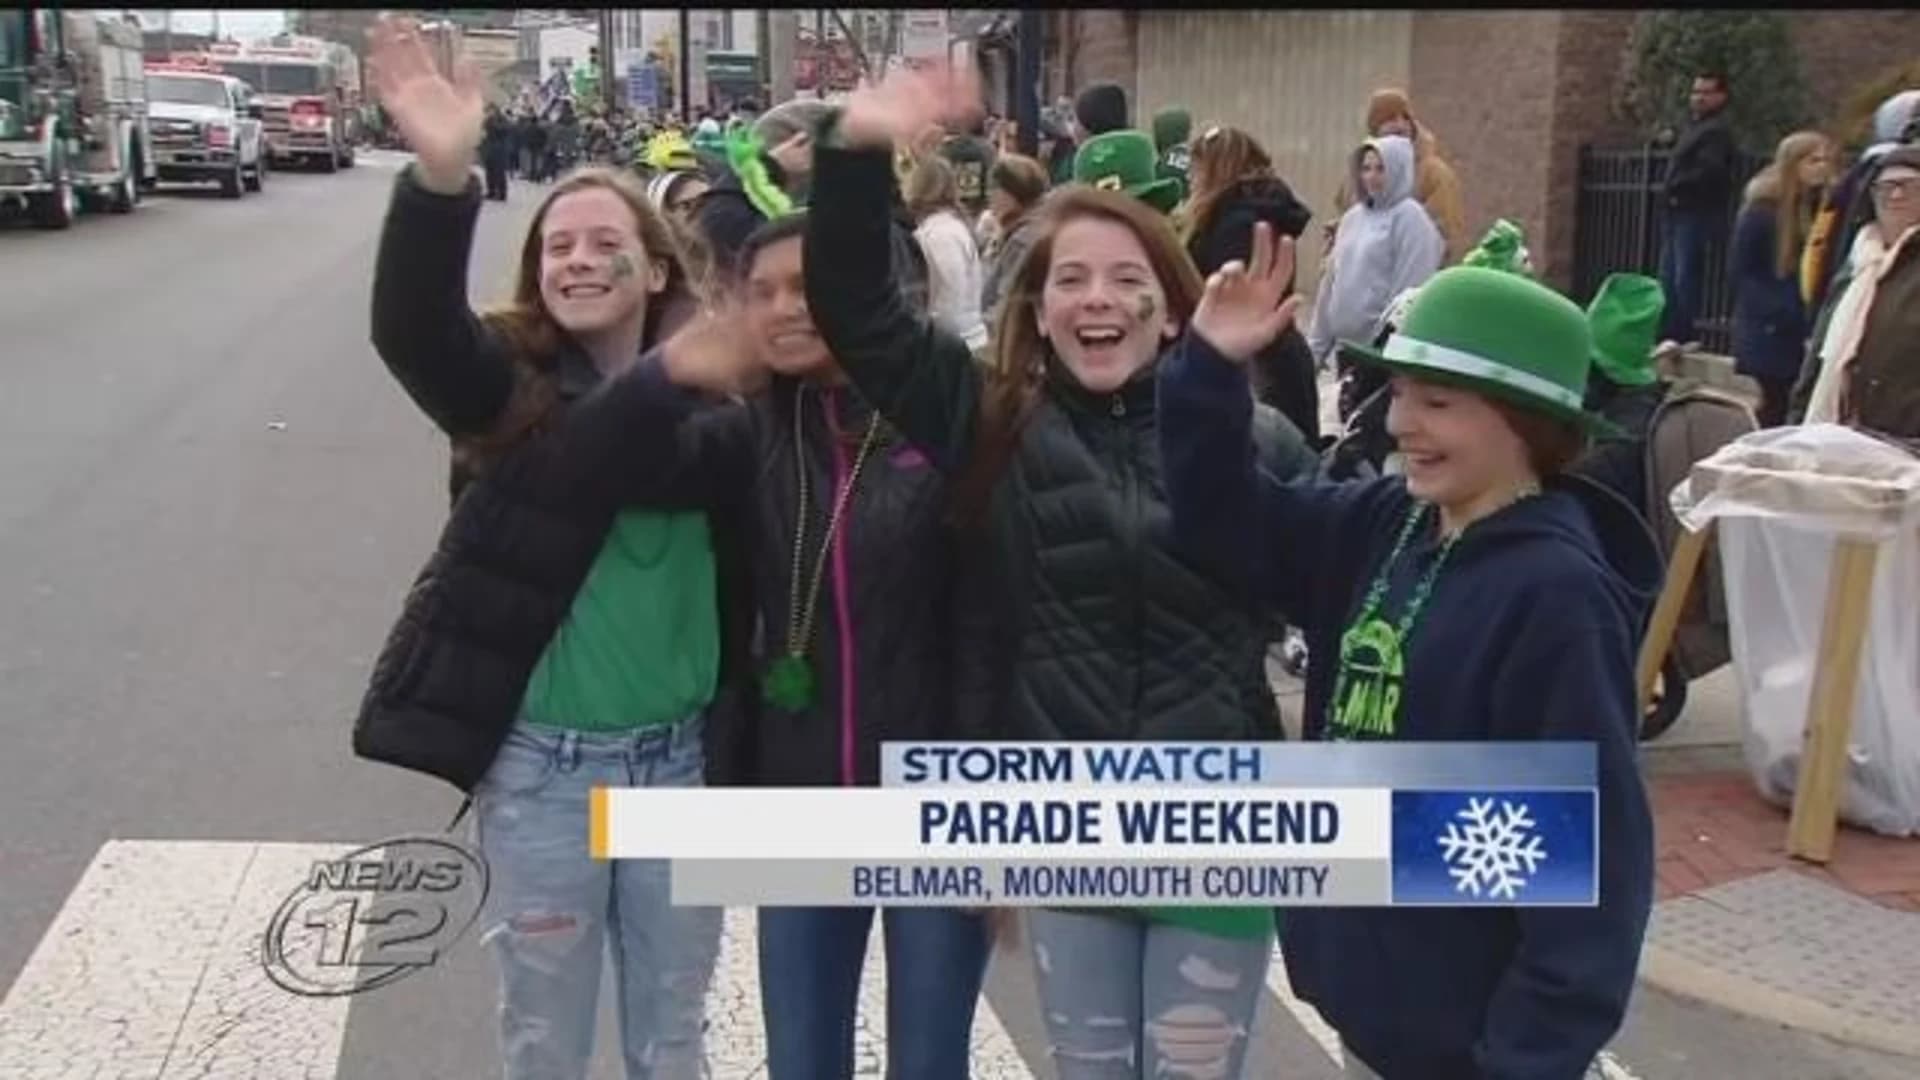 Thousands hoping to see more green than white for Belmar parade